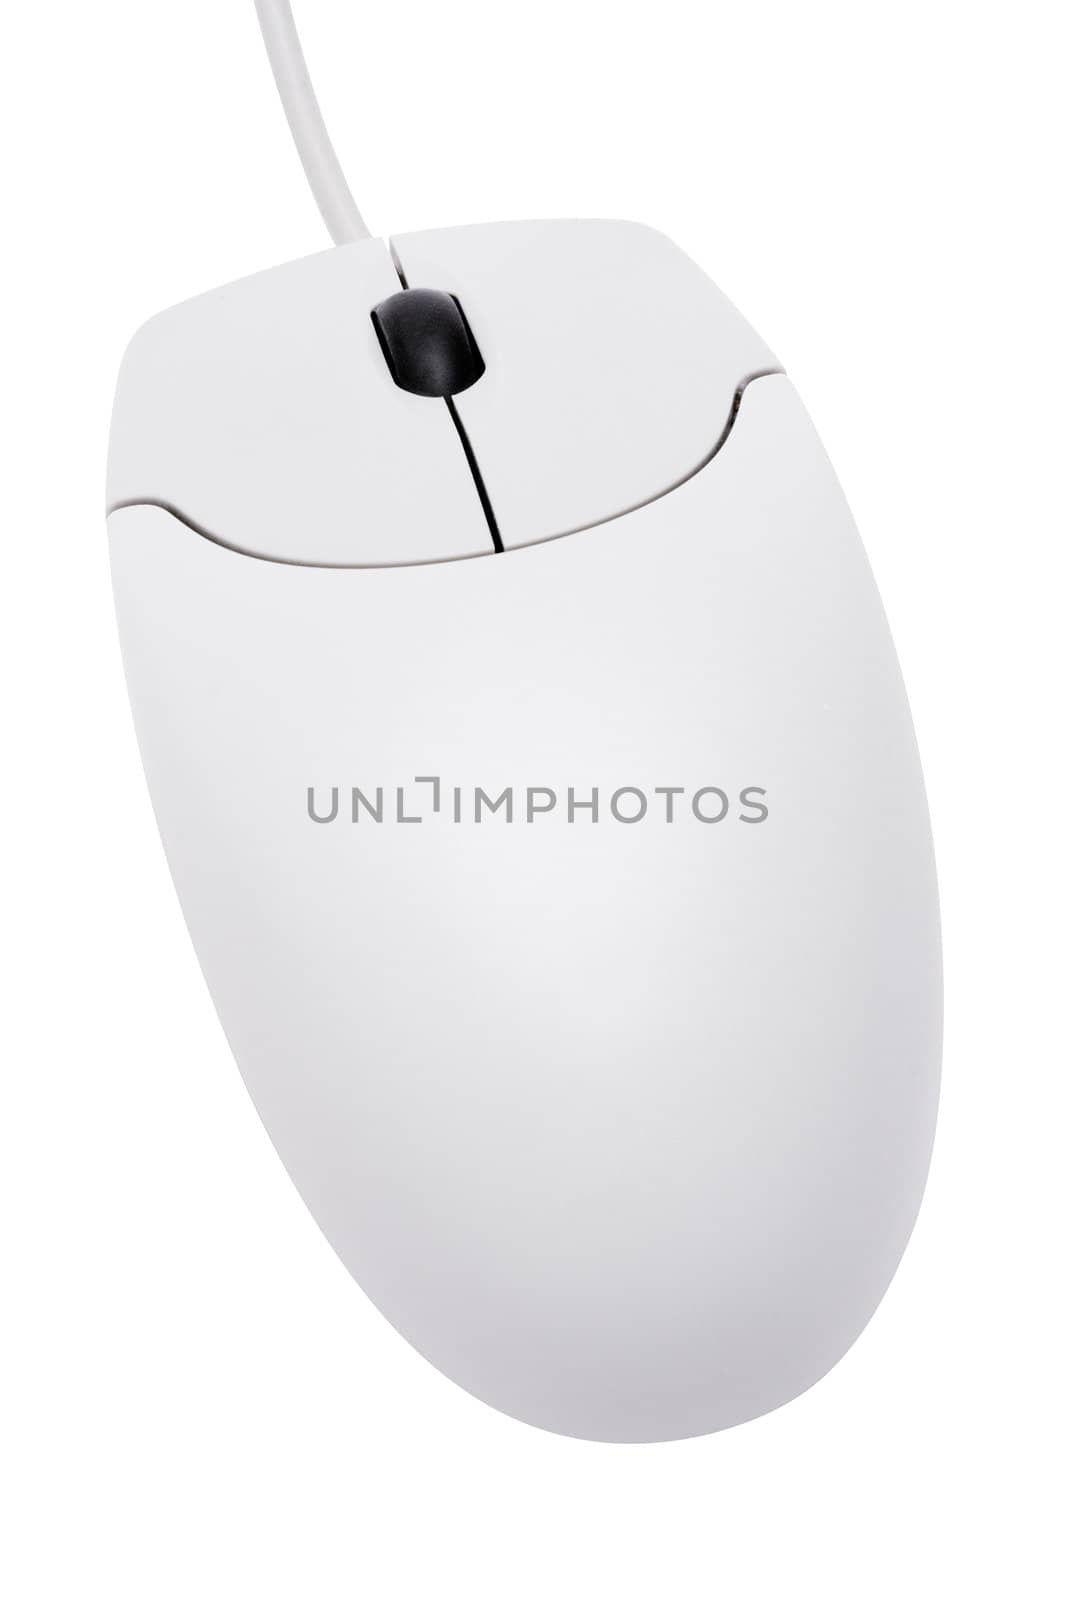 White Computer Mouse with Clipping Path by winterling